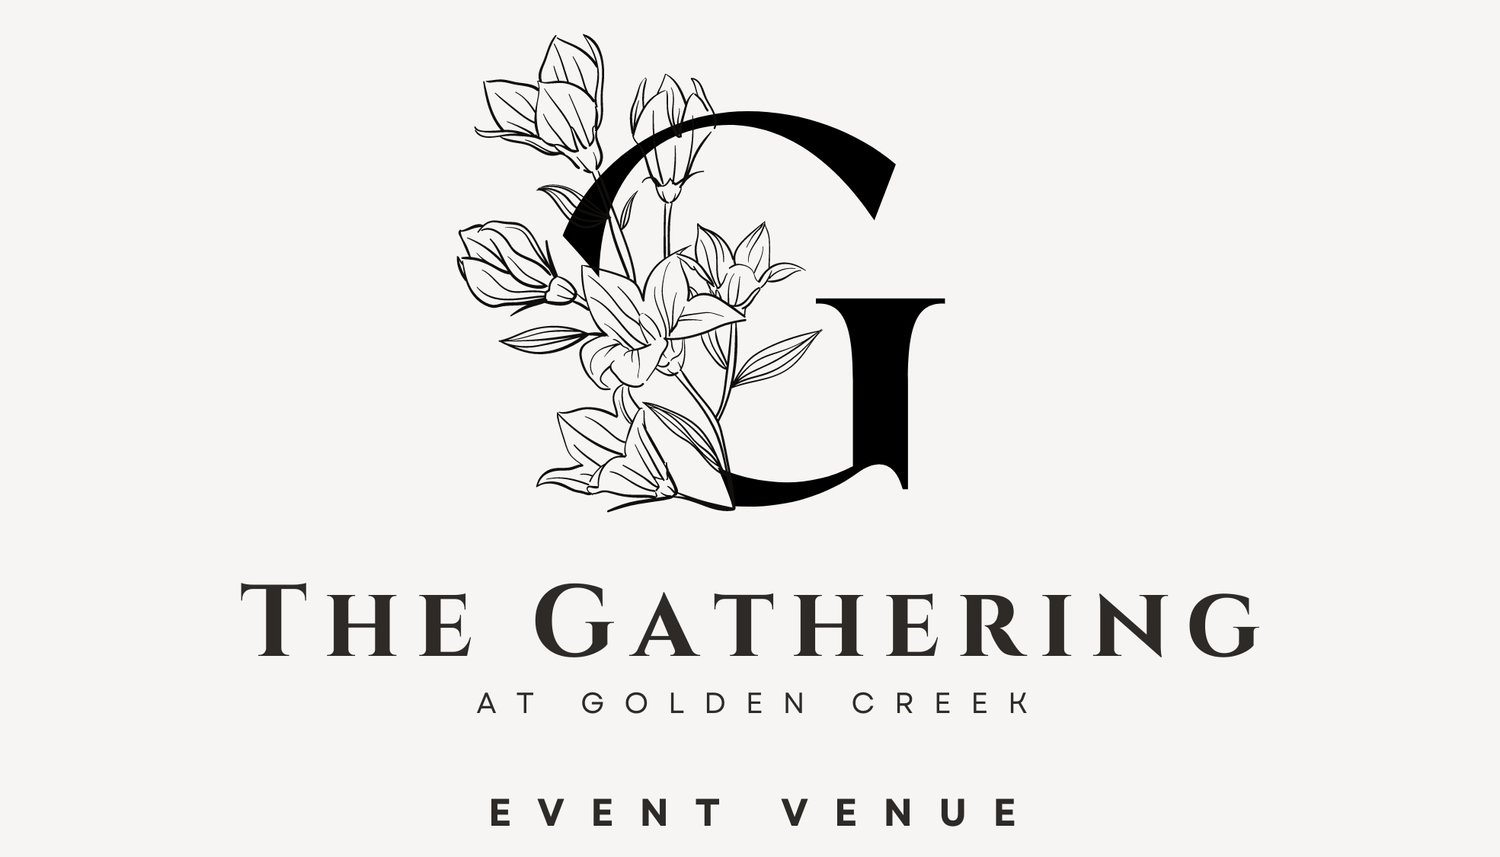 The Gathering at Golden Creek